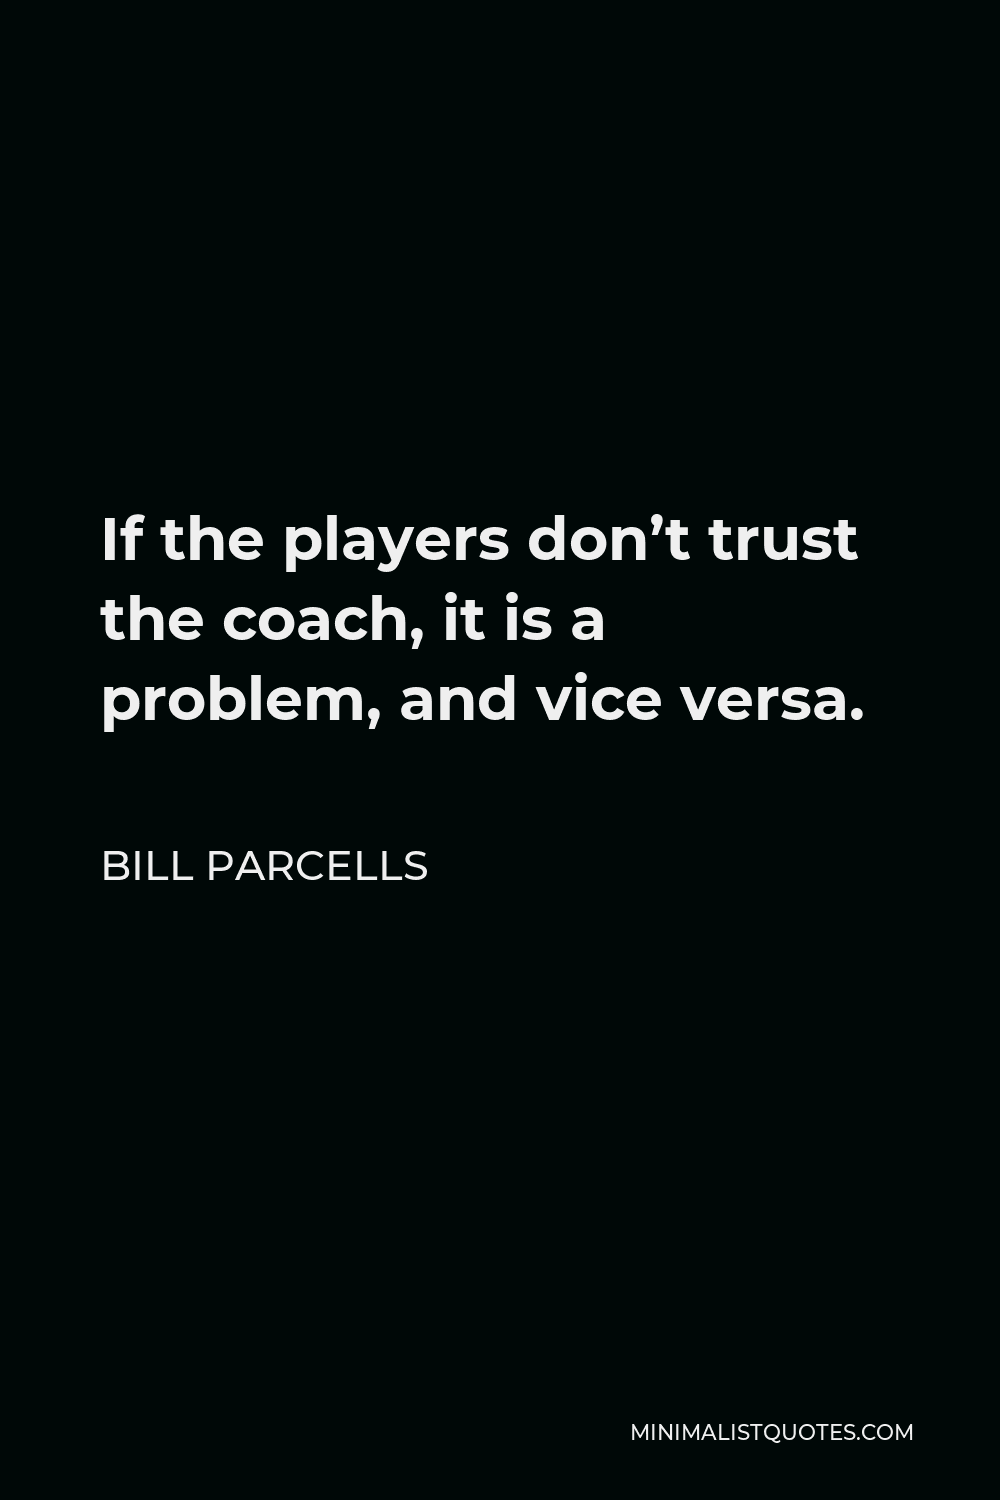 Bill Parcells Quote - If the players don’t trust the coach, it is a problem, and vice versa.